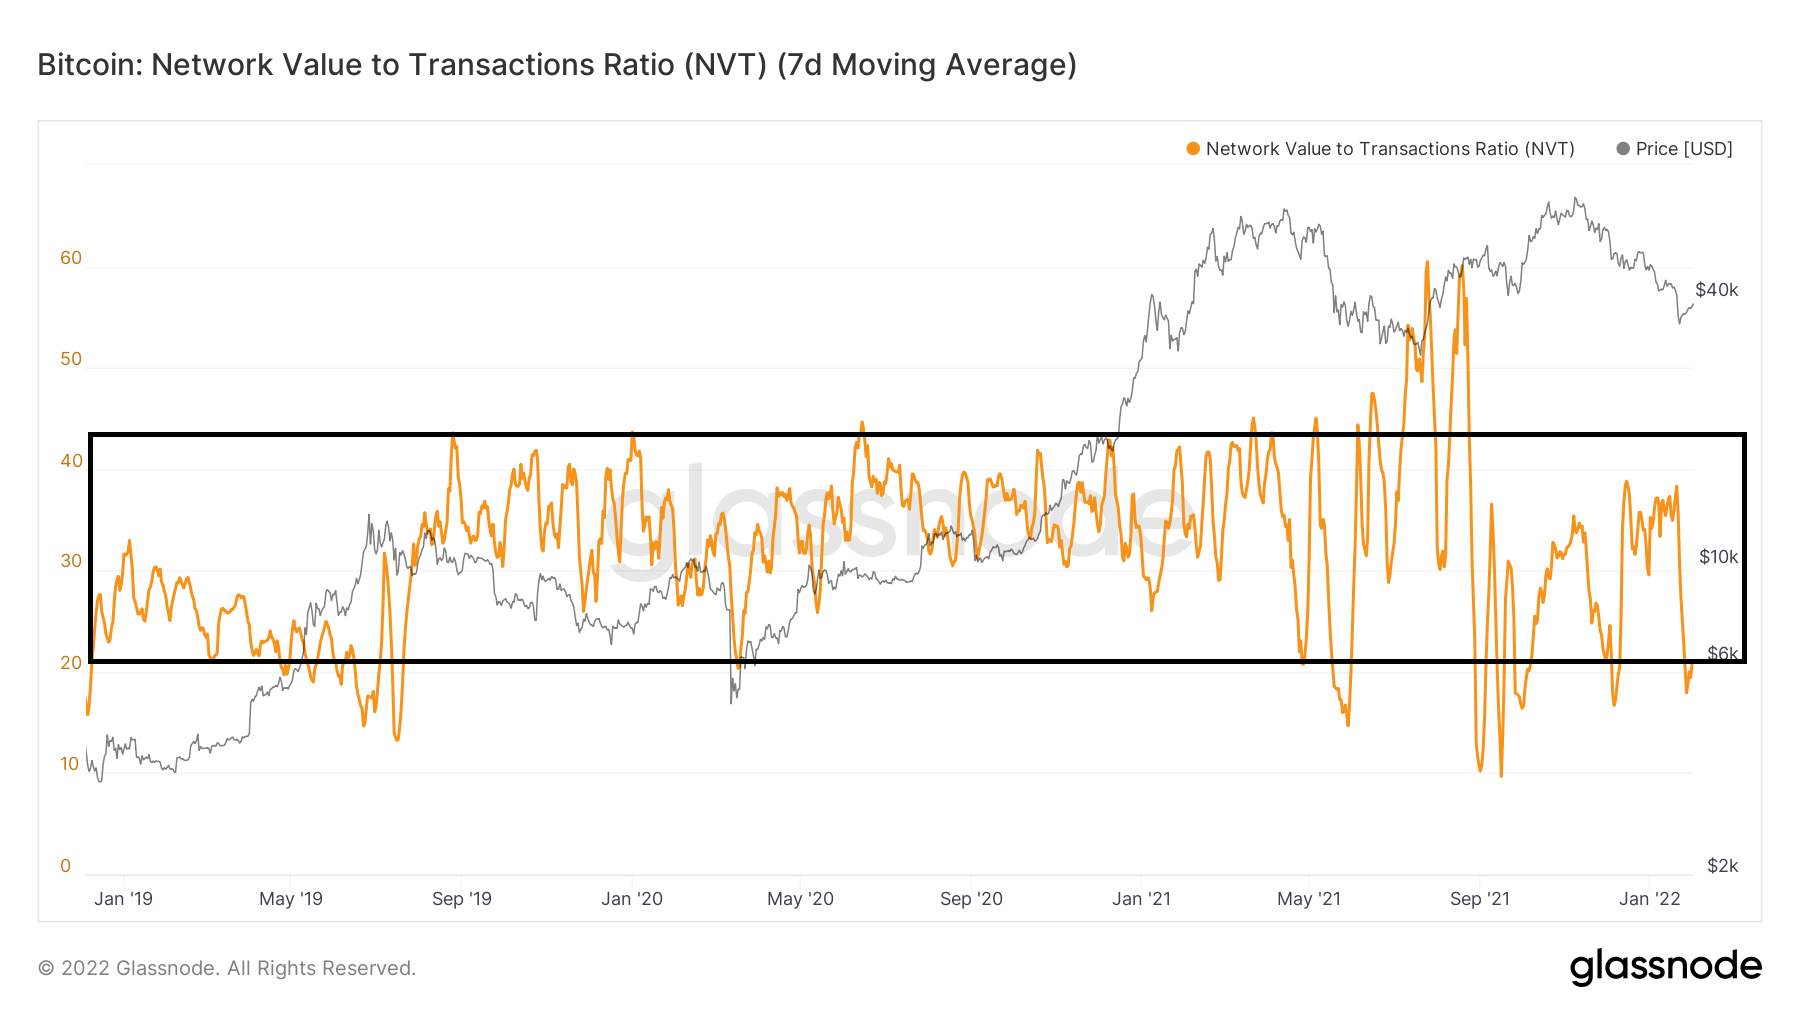 NVT Shows Undervaluation of Network: Bitcoin (BTC) On-Chain Analysis – BeInCrypto